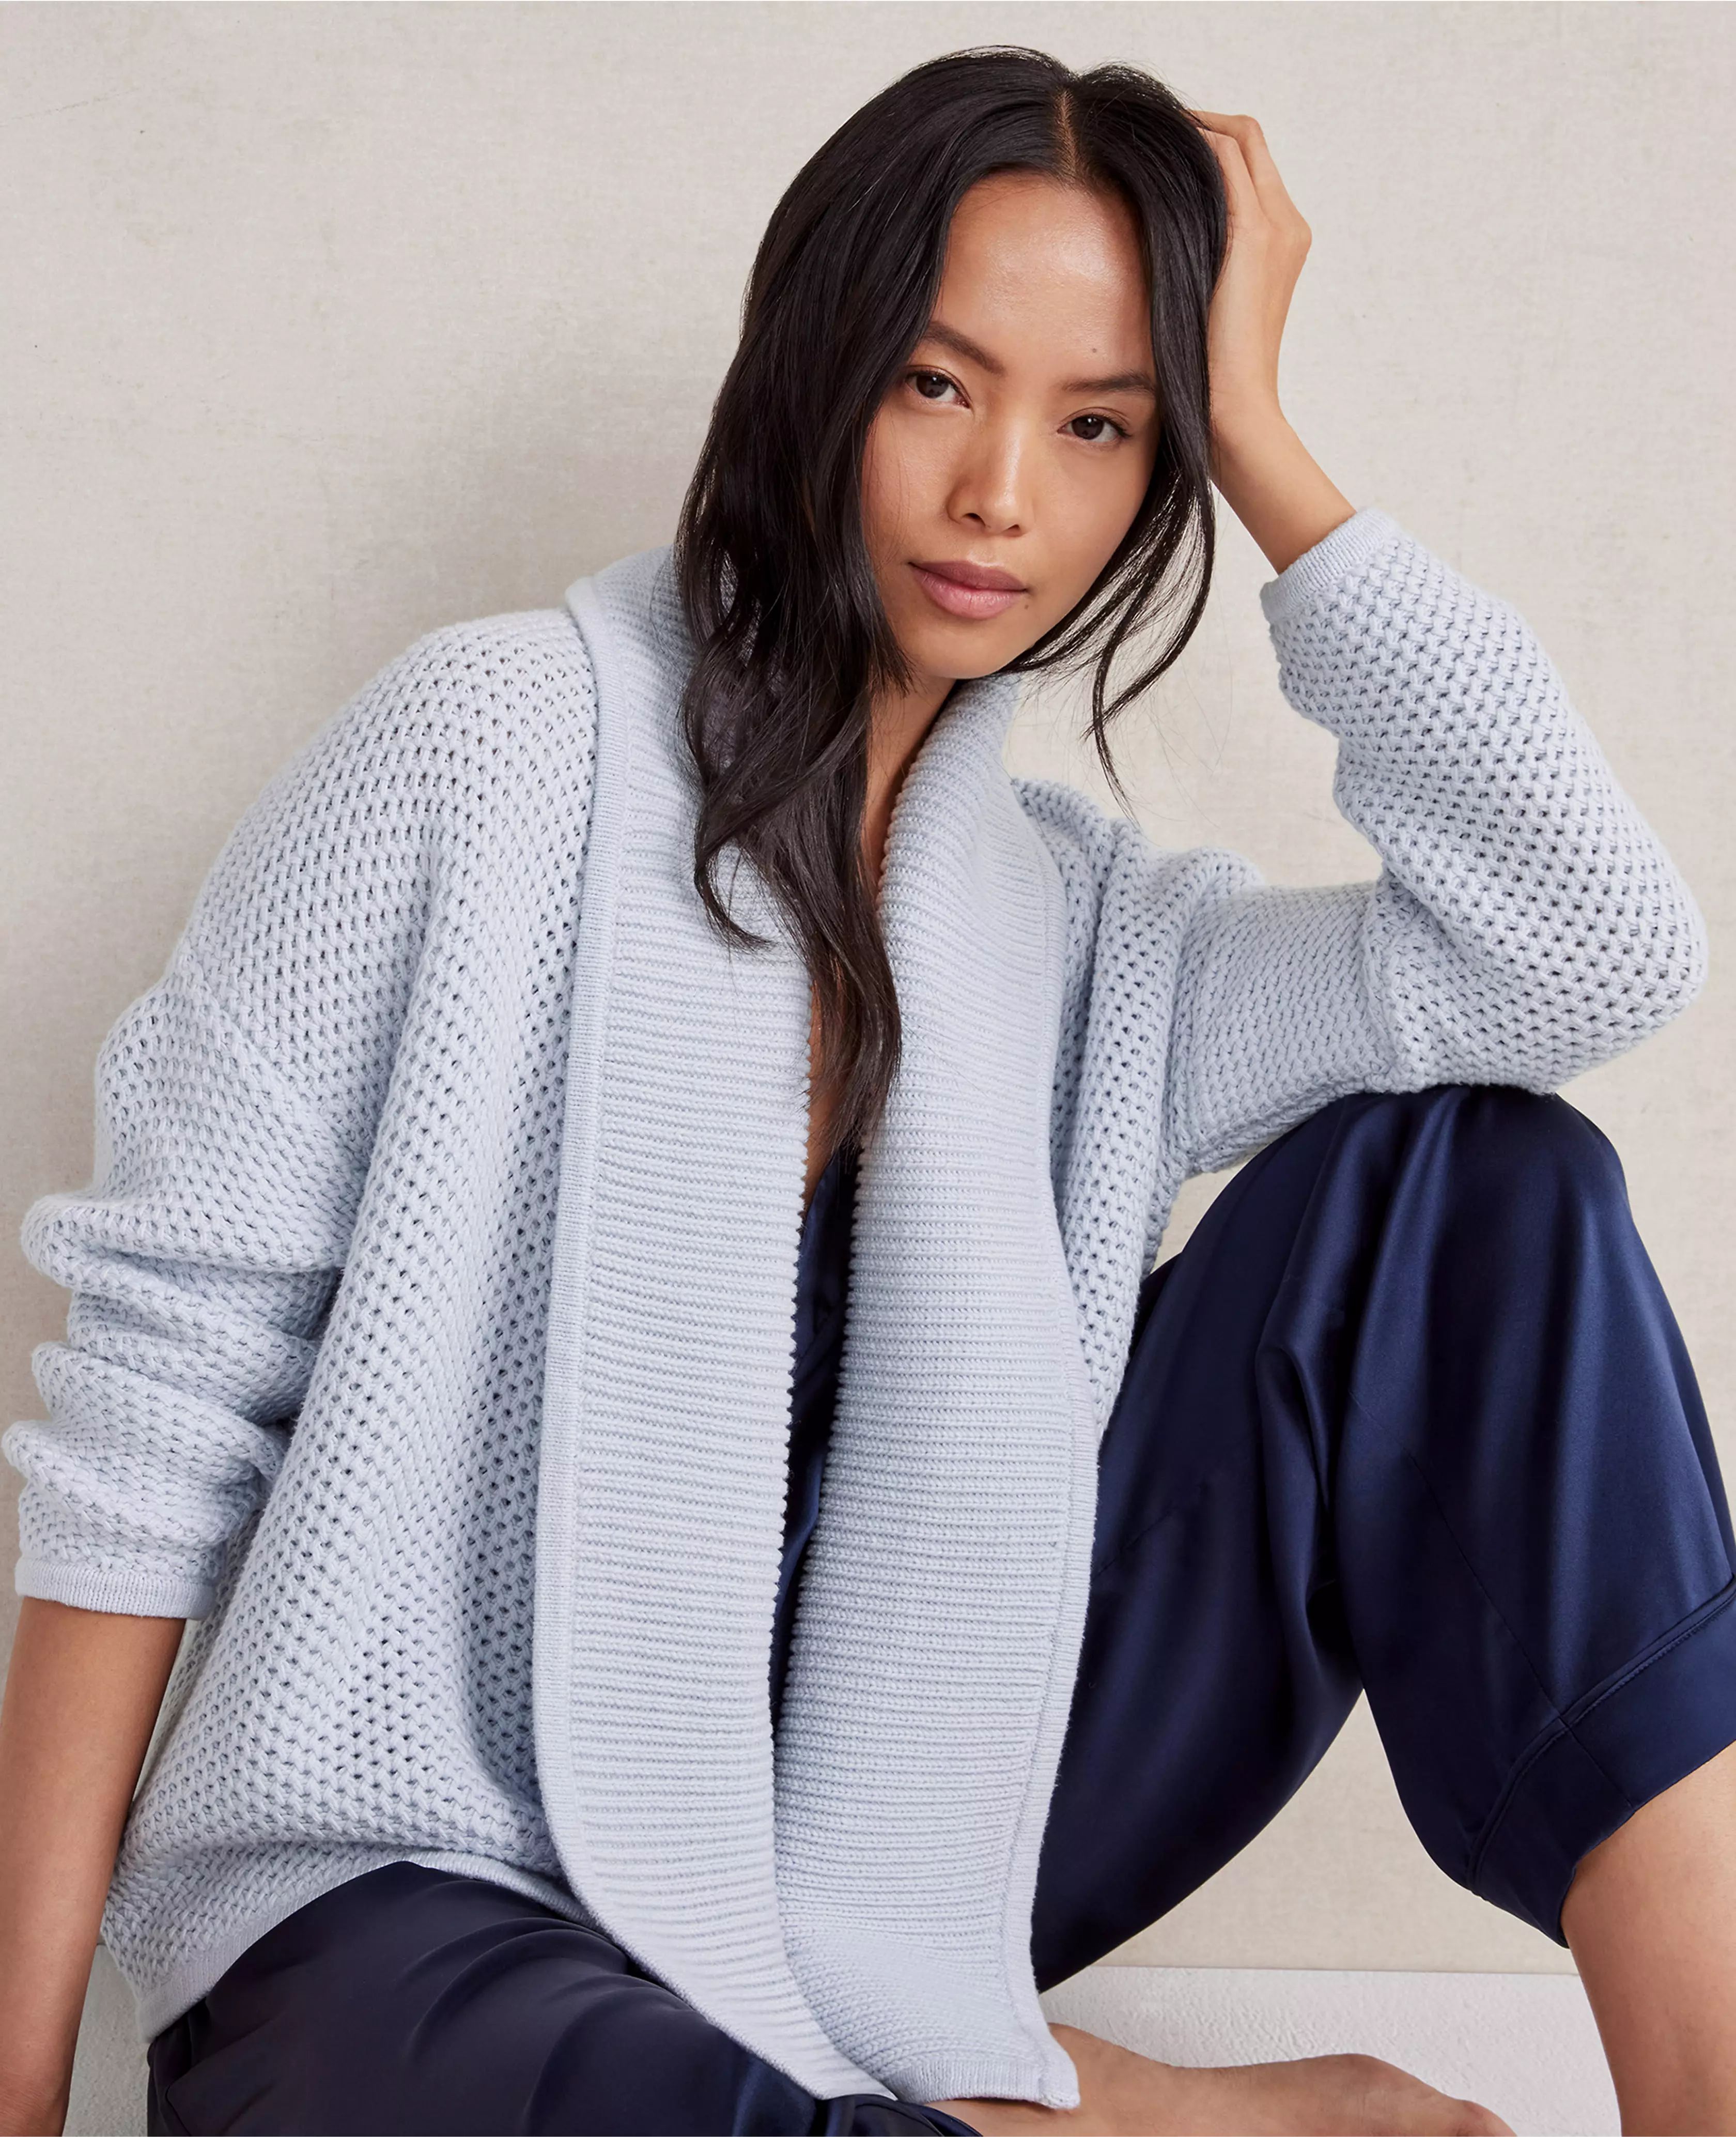 Haven Well Within Organic Cotton Honeycomb Shawl Cardigan | Ann Taylor (US)